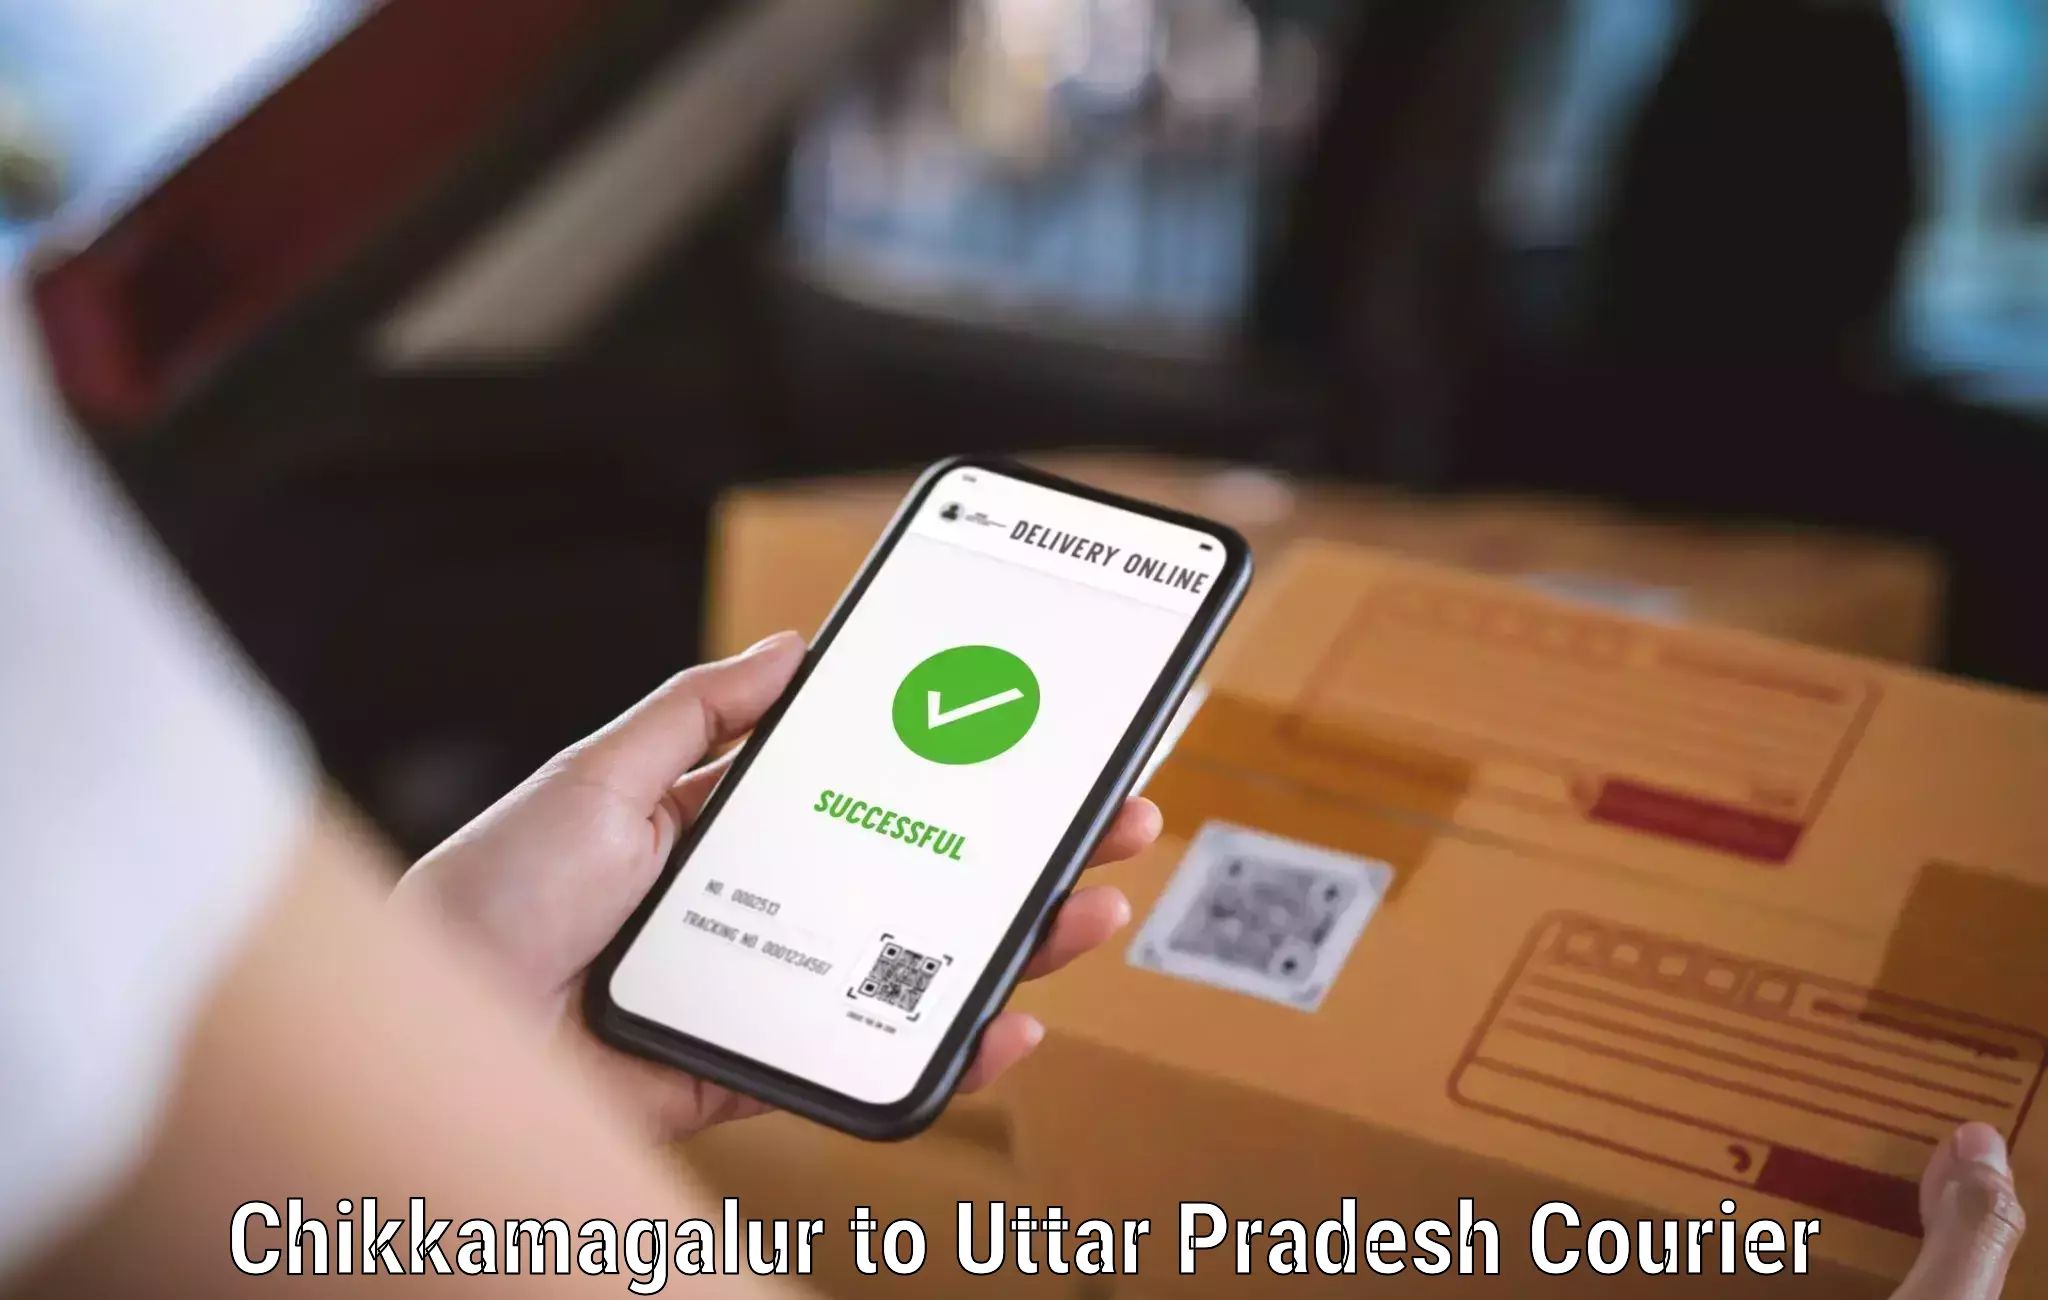 On-demand shipping options Chikkamagalur to IIIT Lucknow